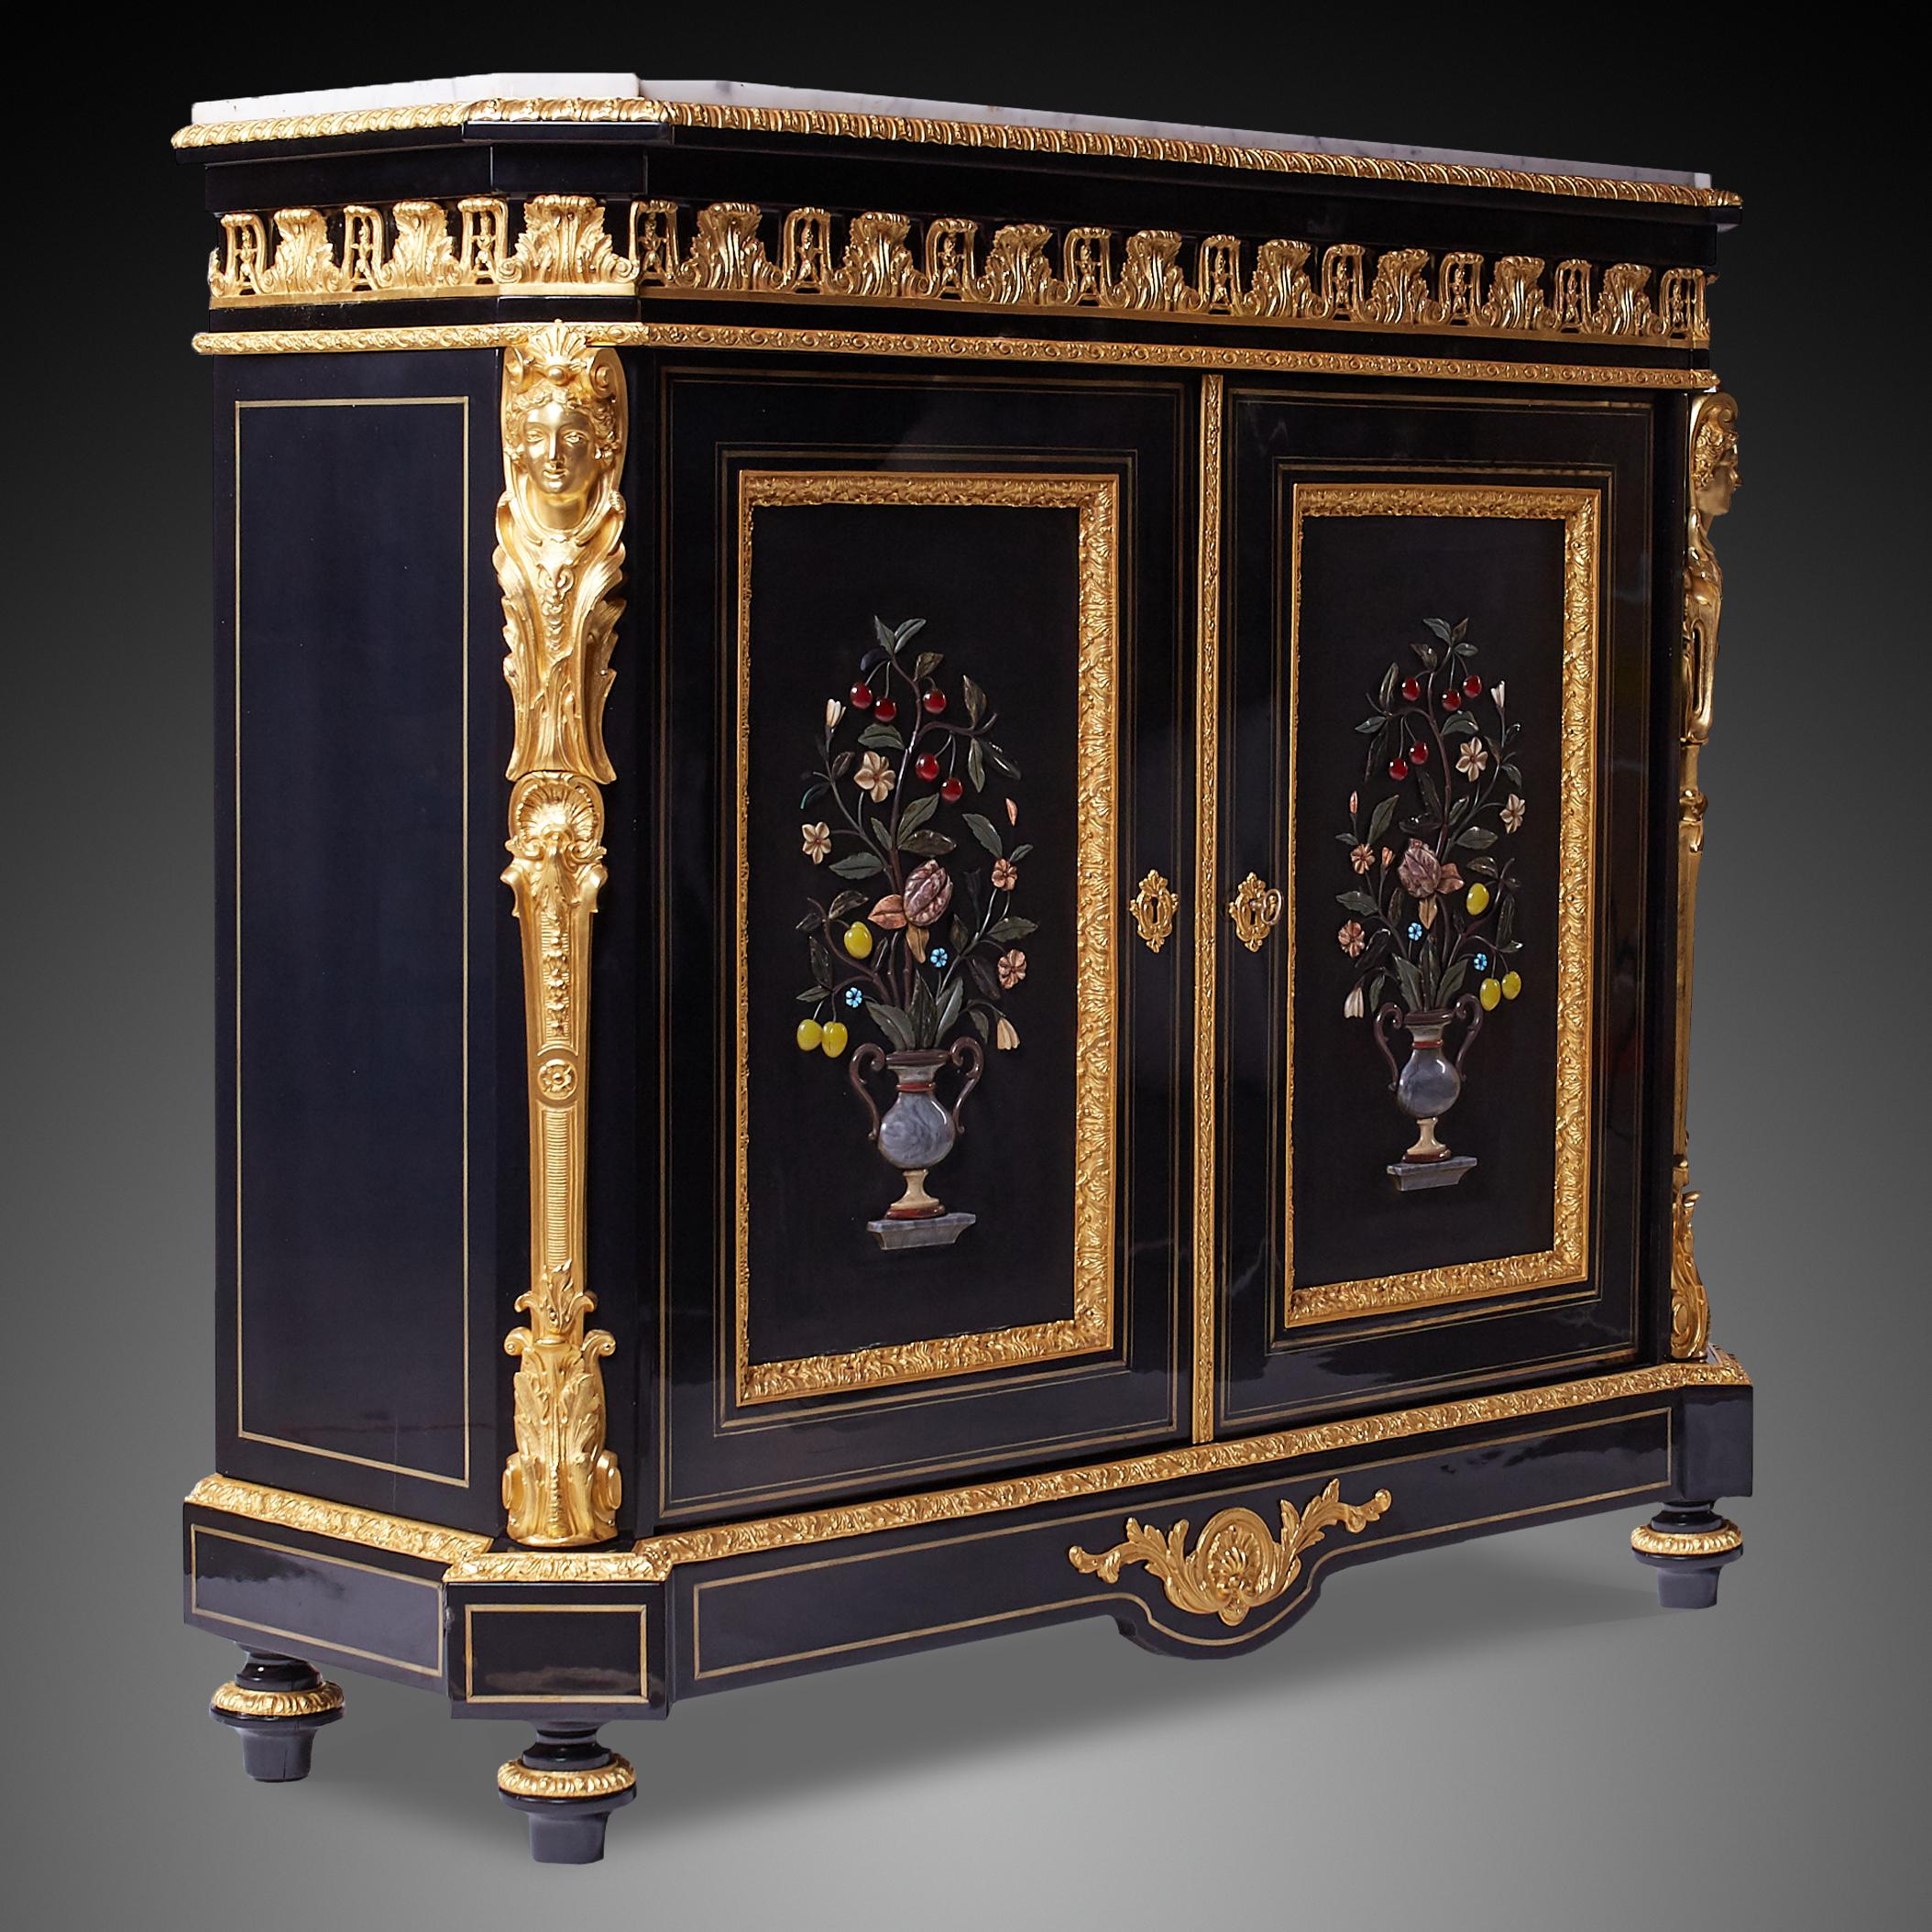 French bronze-mounted Ebonized and Pietra Dura cabinet 
Empire style ormolu and Pietra dura cabinet from 19th c.

Napoleon III ormolu veneered ebony cabinet in Second Empire style by. In the 19th century, the Empire style prevailed in the years